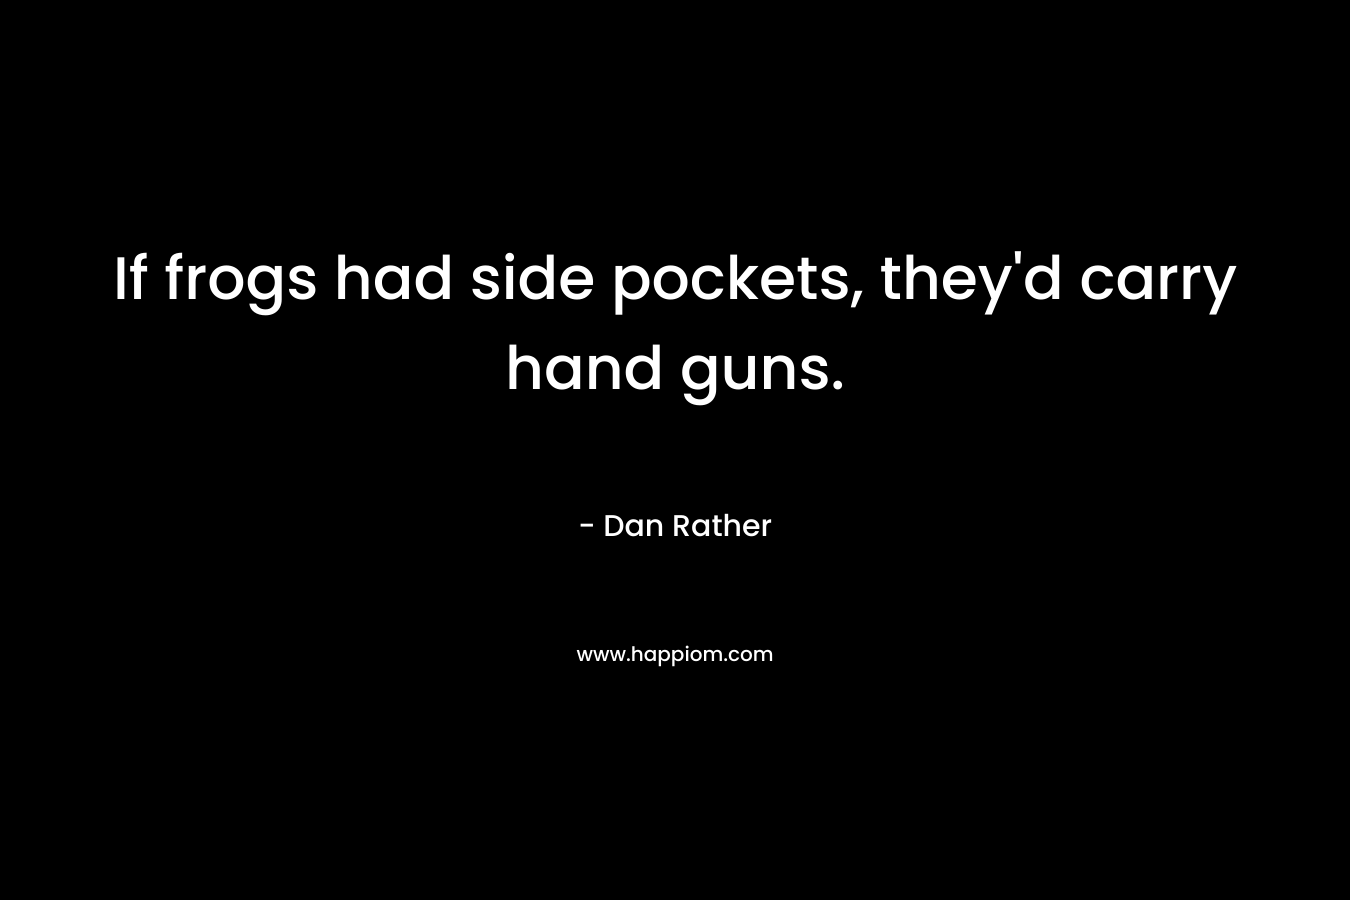 If frogs had side pockets, they’d carry hand guns. – Dan Rather